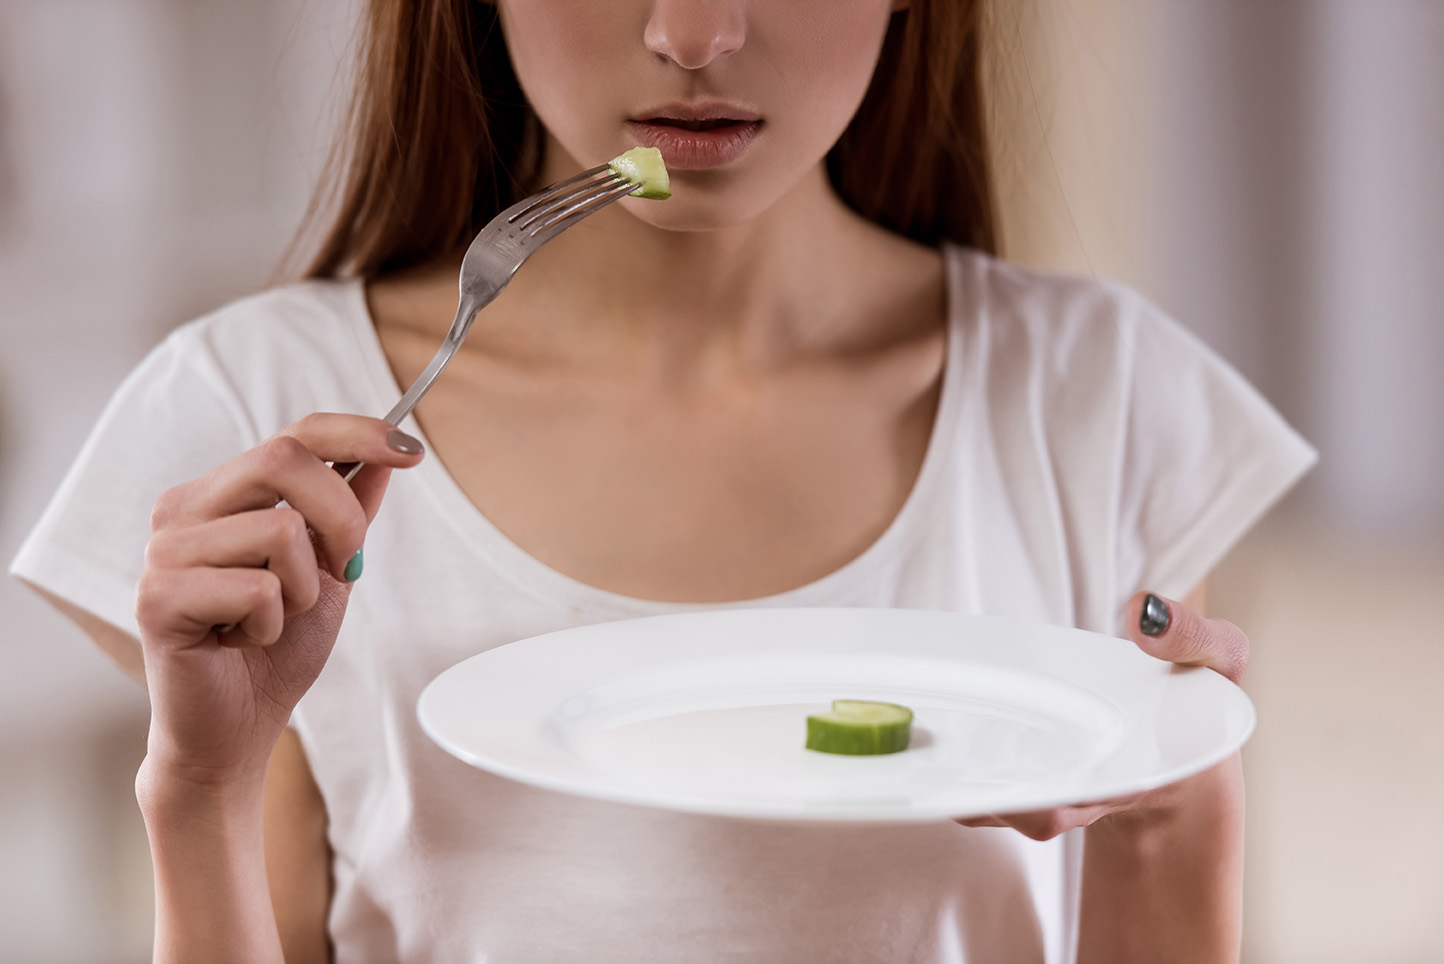 9 Truths about Eating Disorders